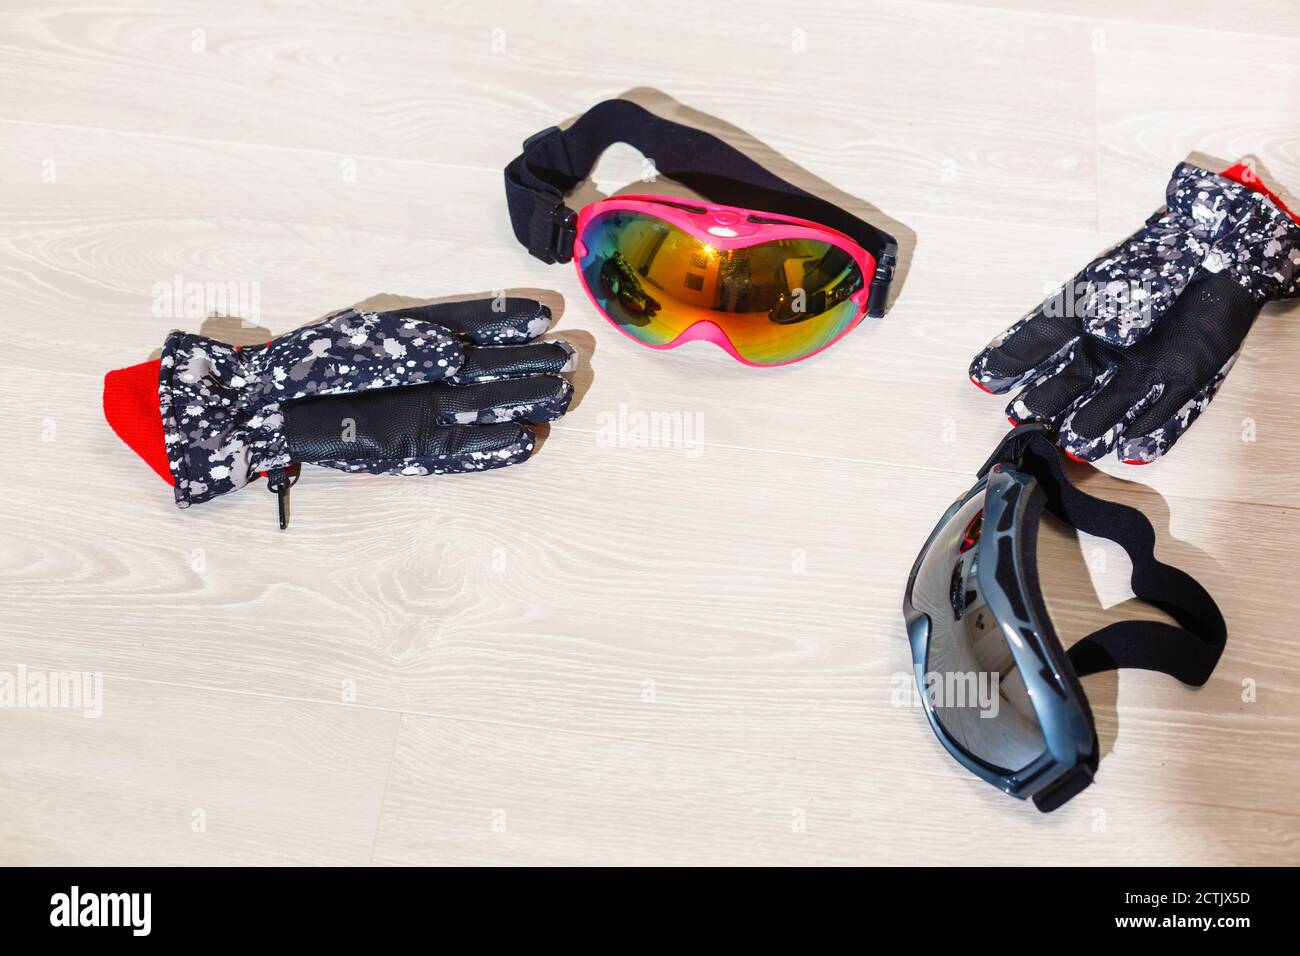 Ski goggles and winter gloves on white background Stock Photo